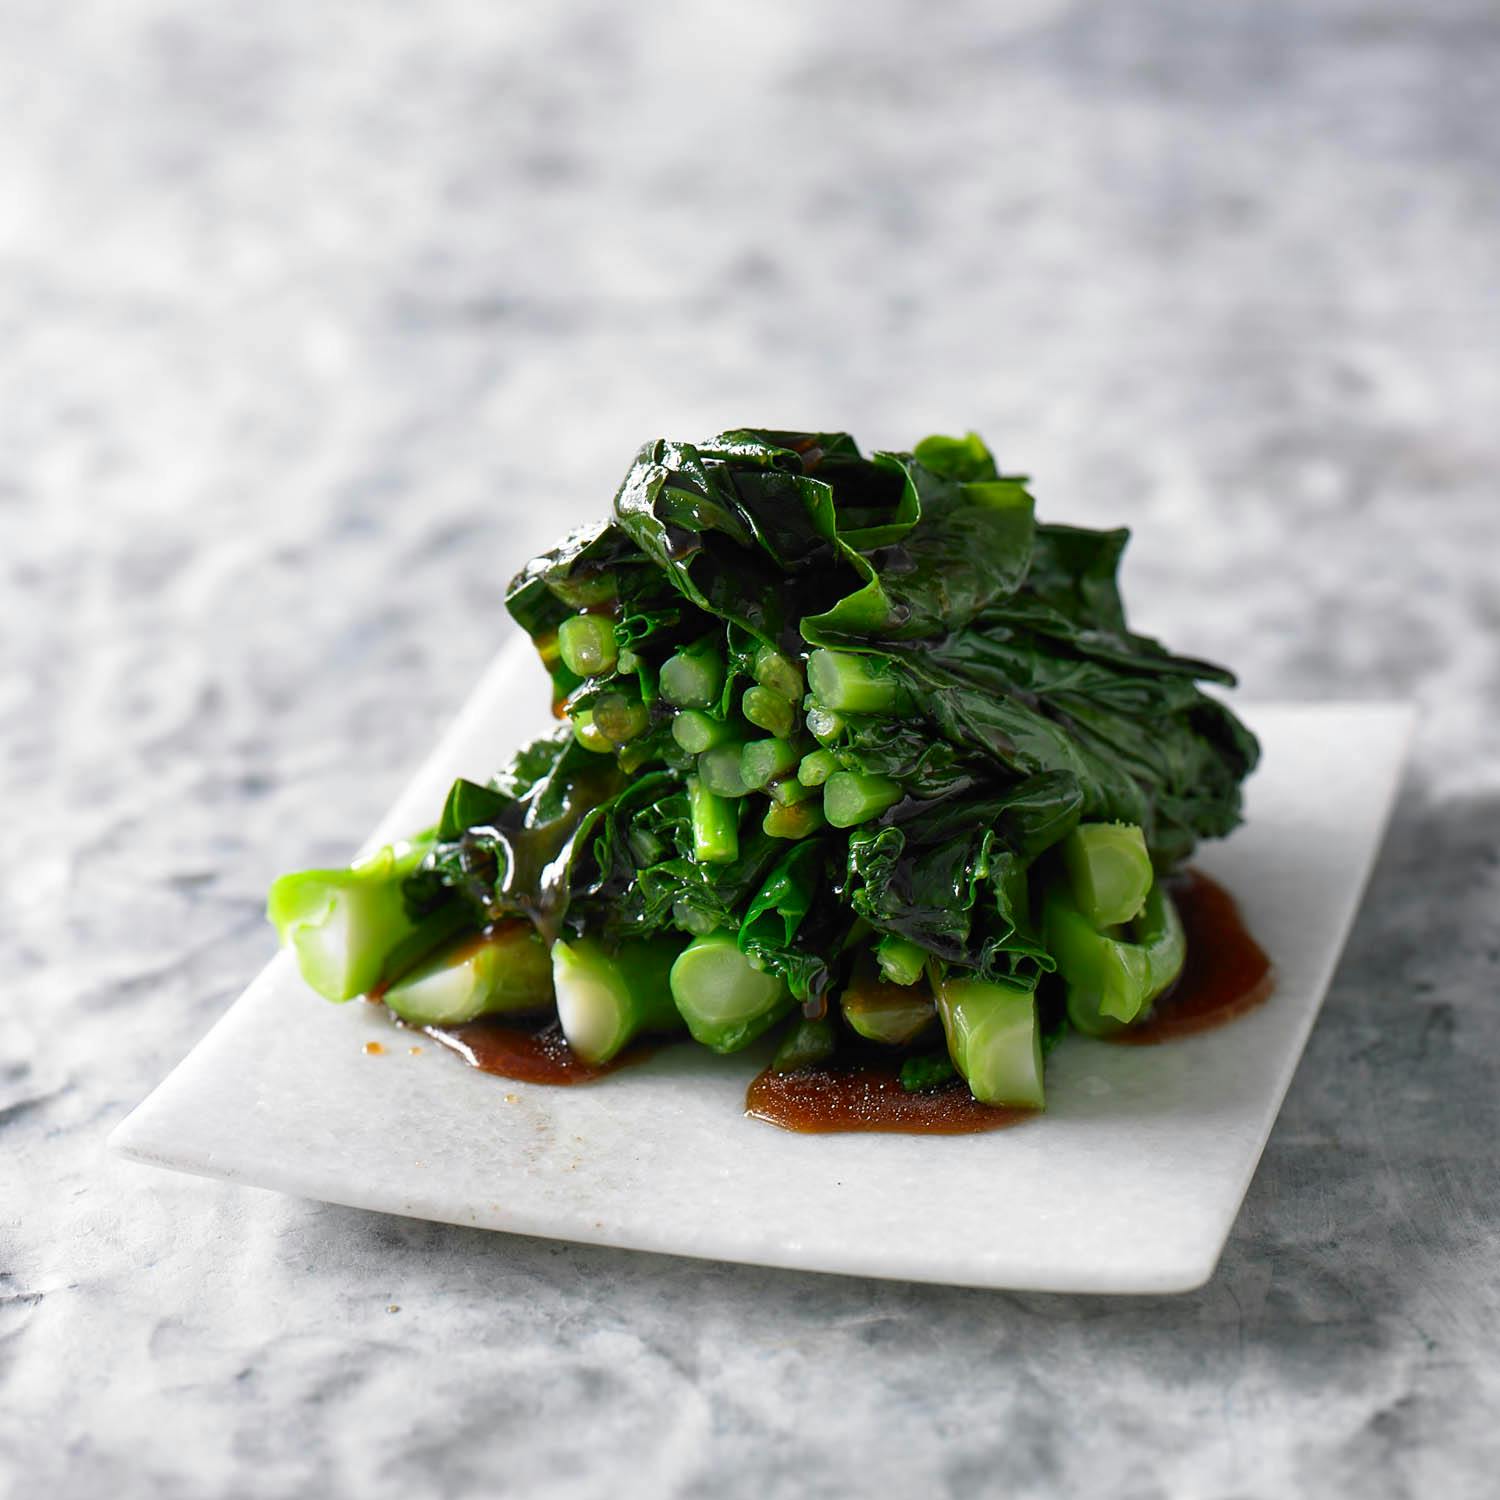 Adam Liaw's grilled gem lettuce with anchovy vinaigrette